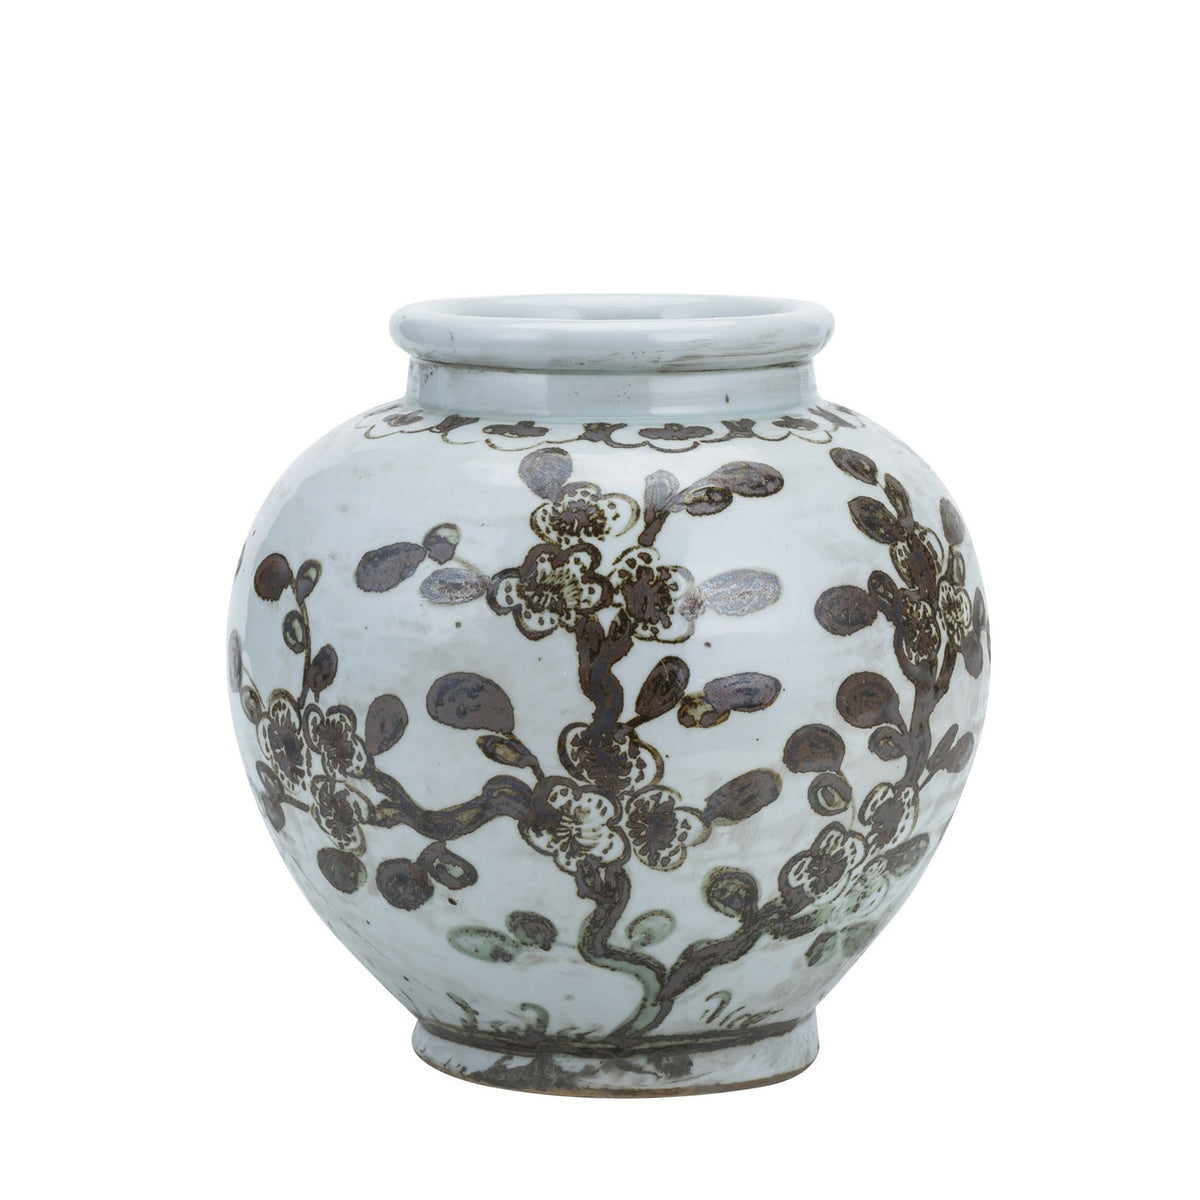 Small brown chinoiserie vase